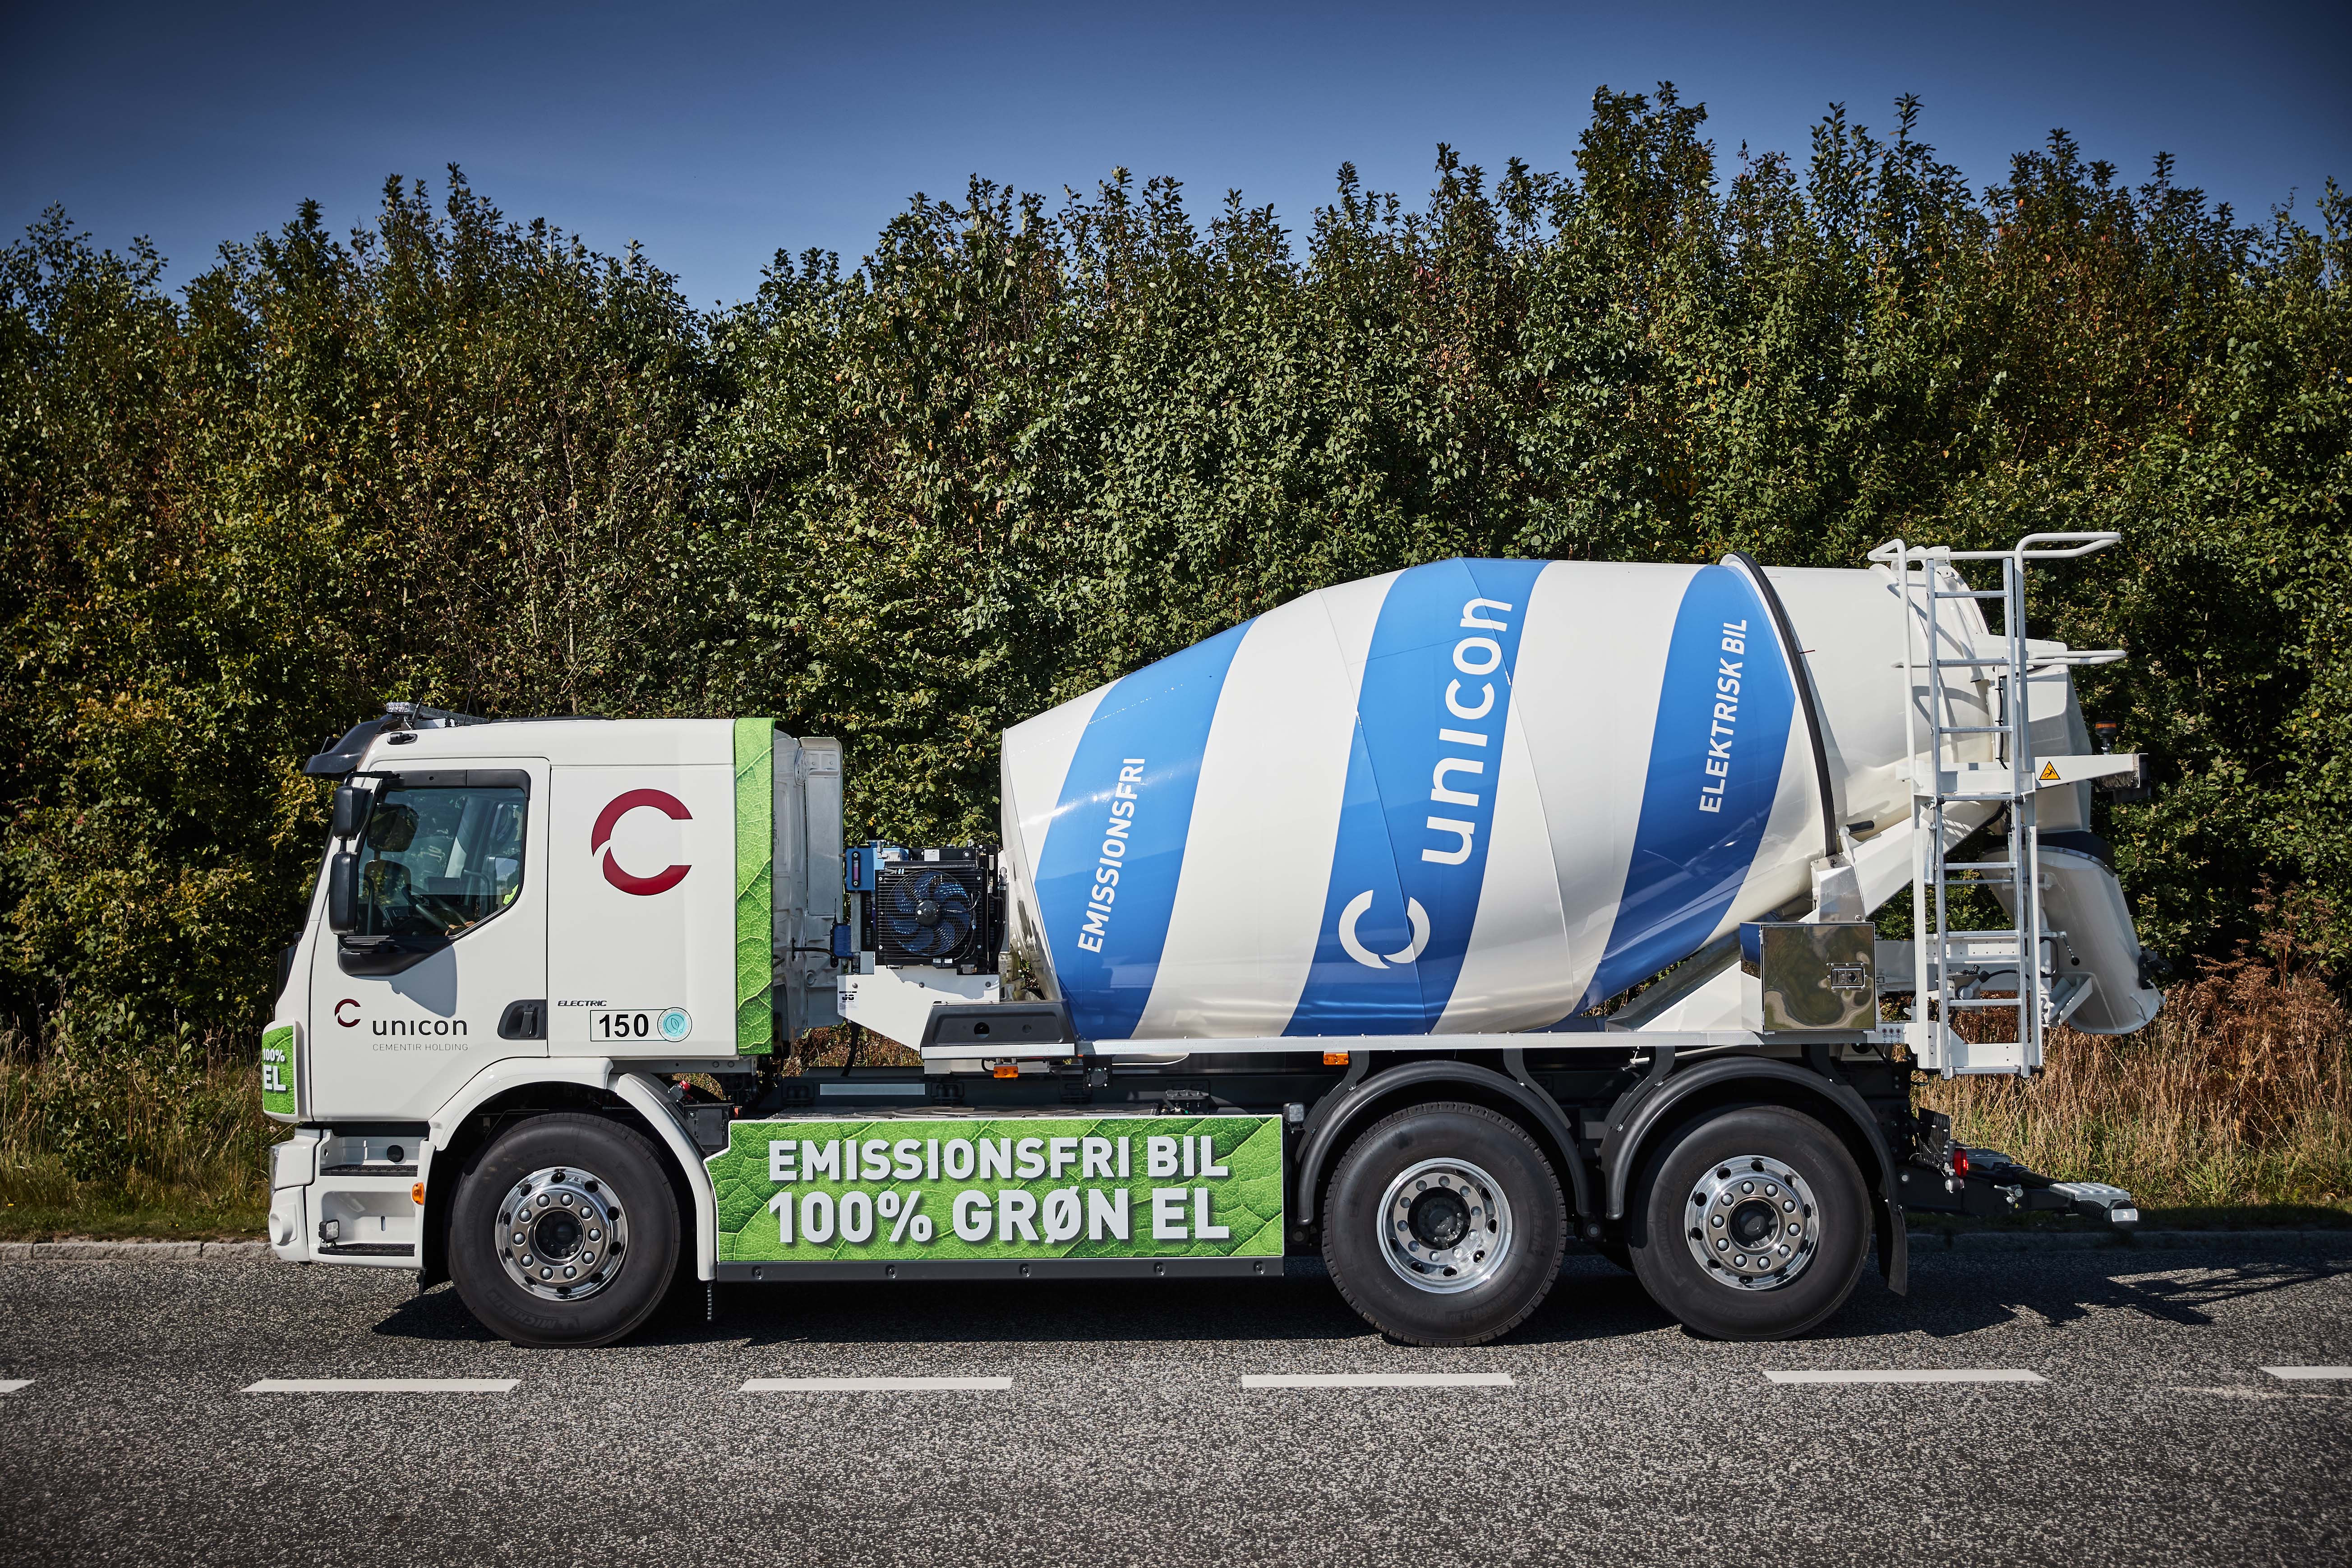 Unicon is now taking the next big step towards emission-free distribution by introducing a new generation of electric truck mixers 